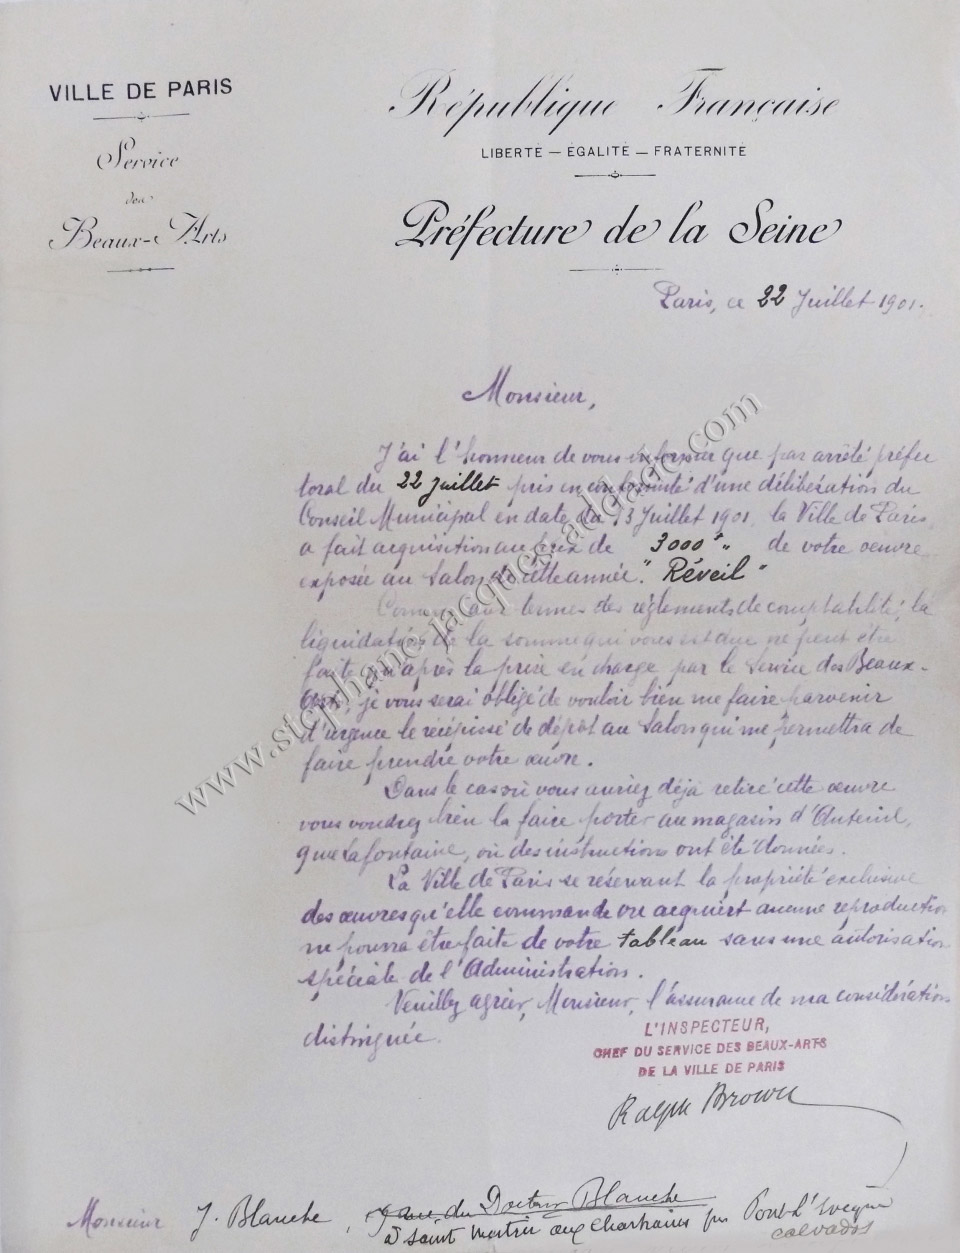 Letter about the purchase of Réveil (Just awake) by the City of Paris, July 1901